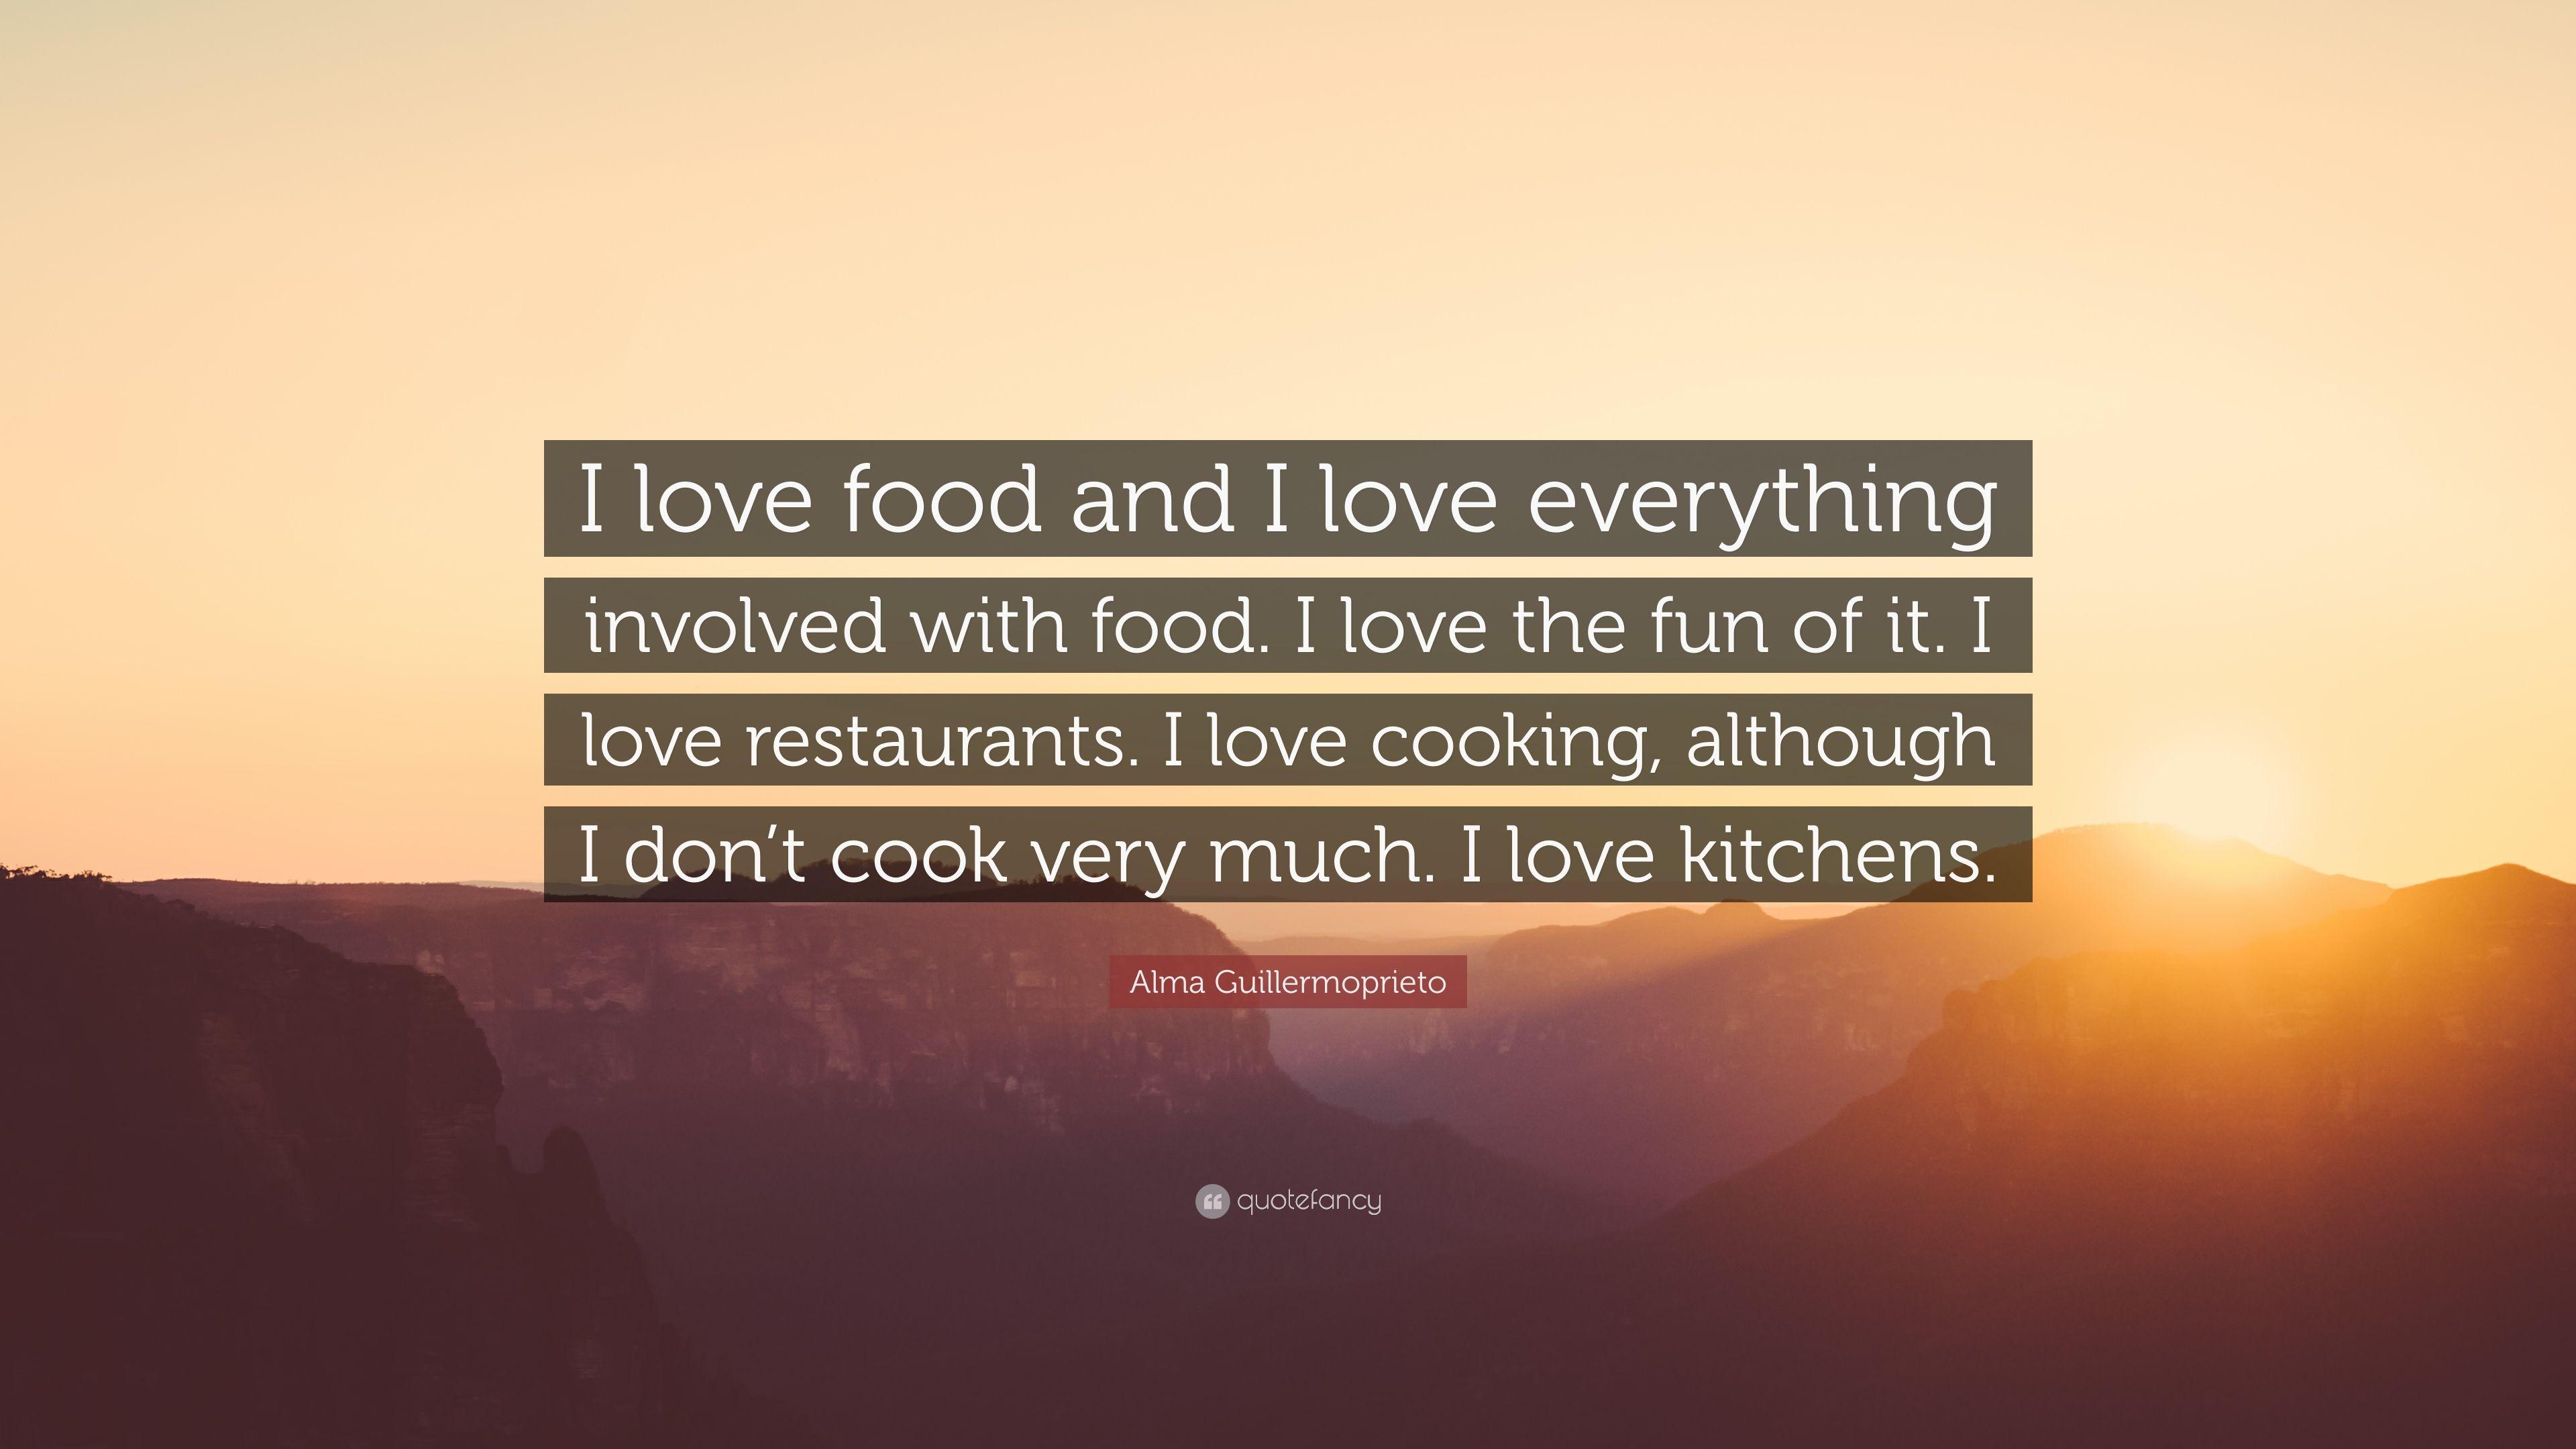 Alma Guillermoprieto Quote: “I love food and I love everything